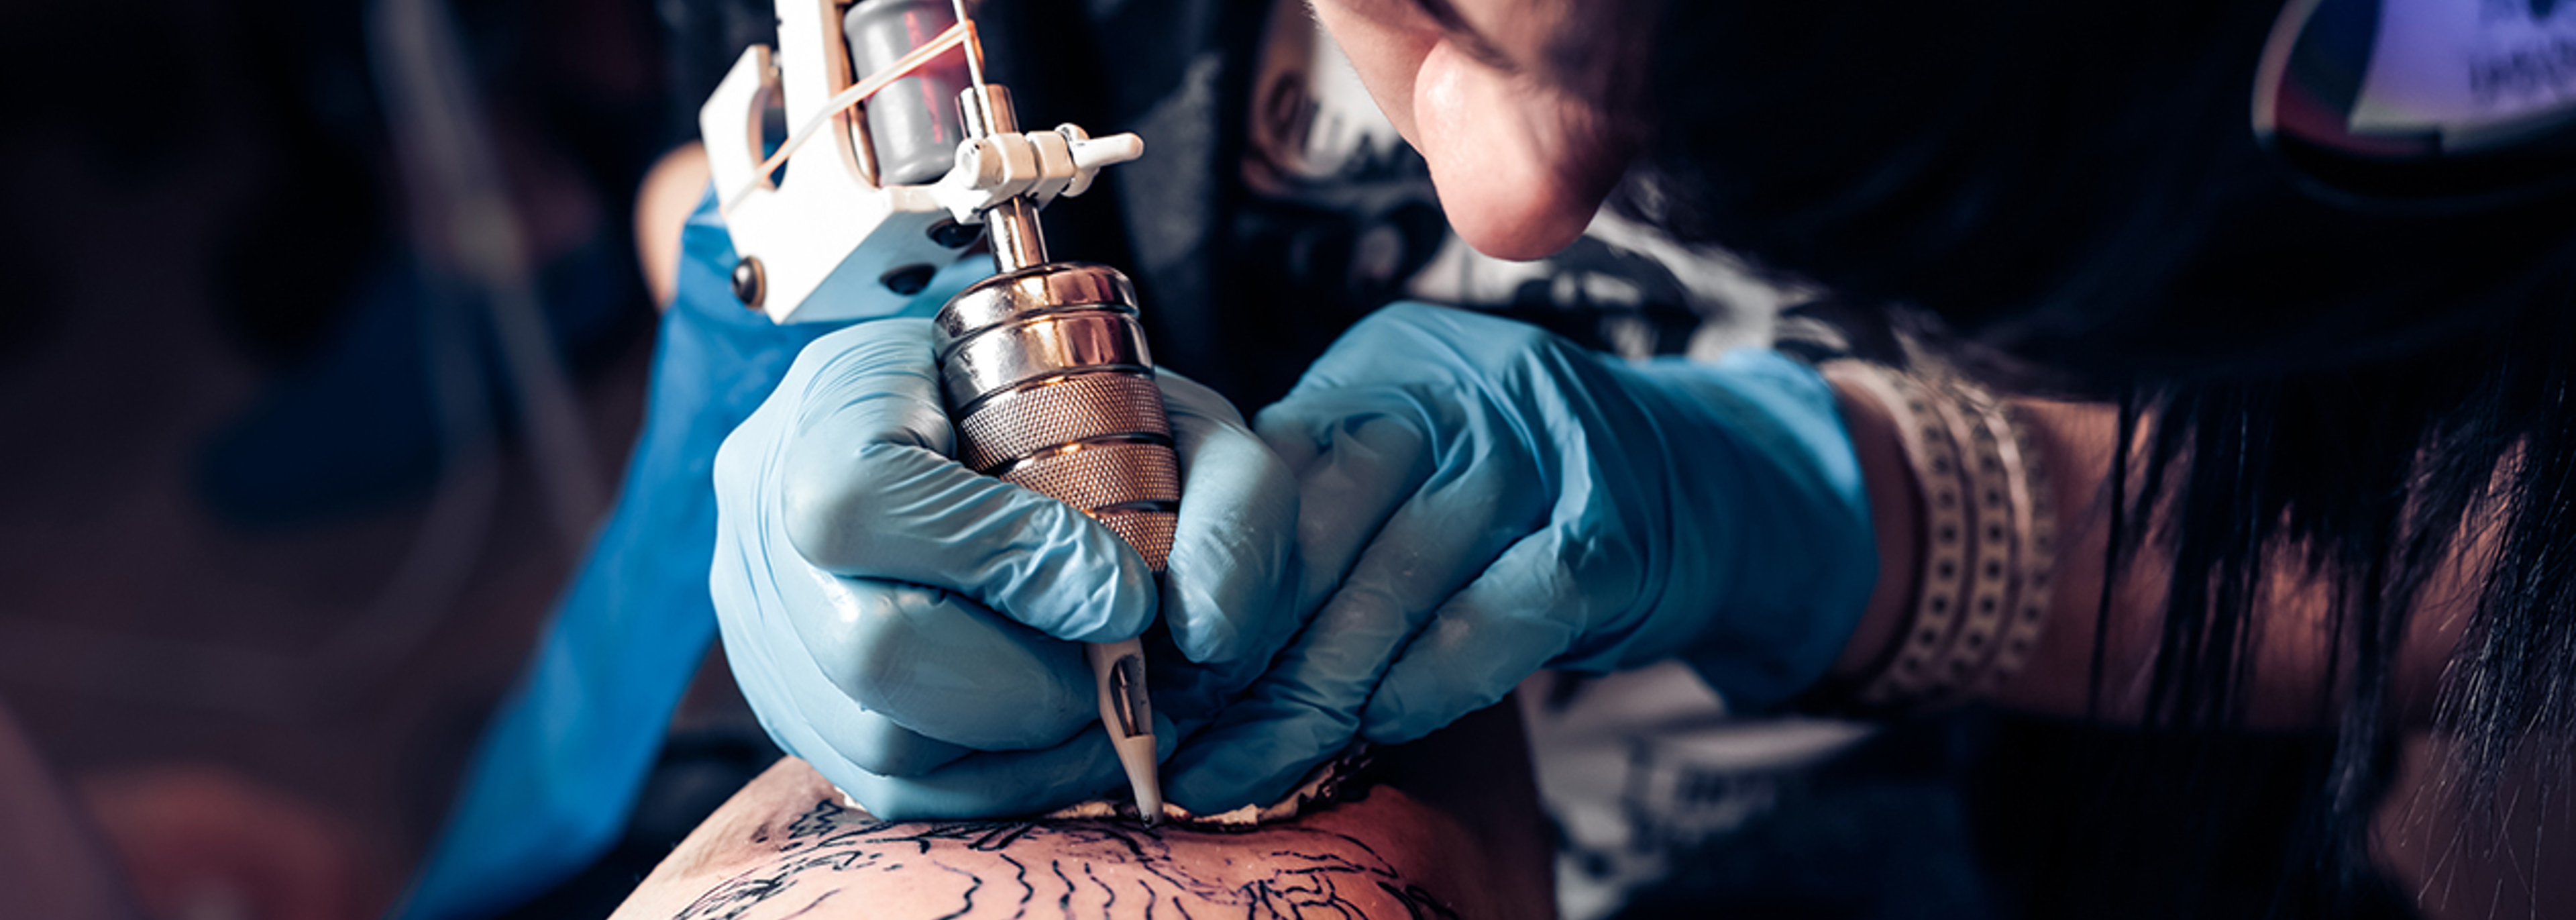 Regulation of tattoo shops ‘not fit for purpose’